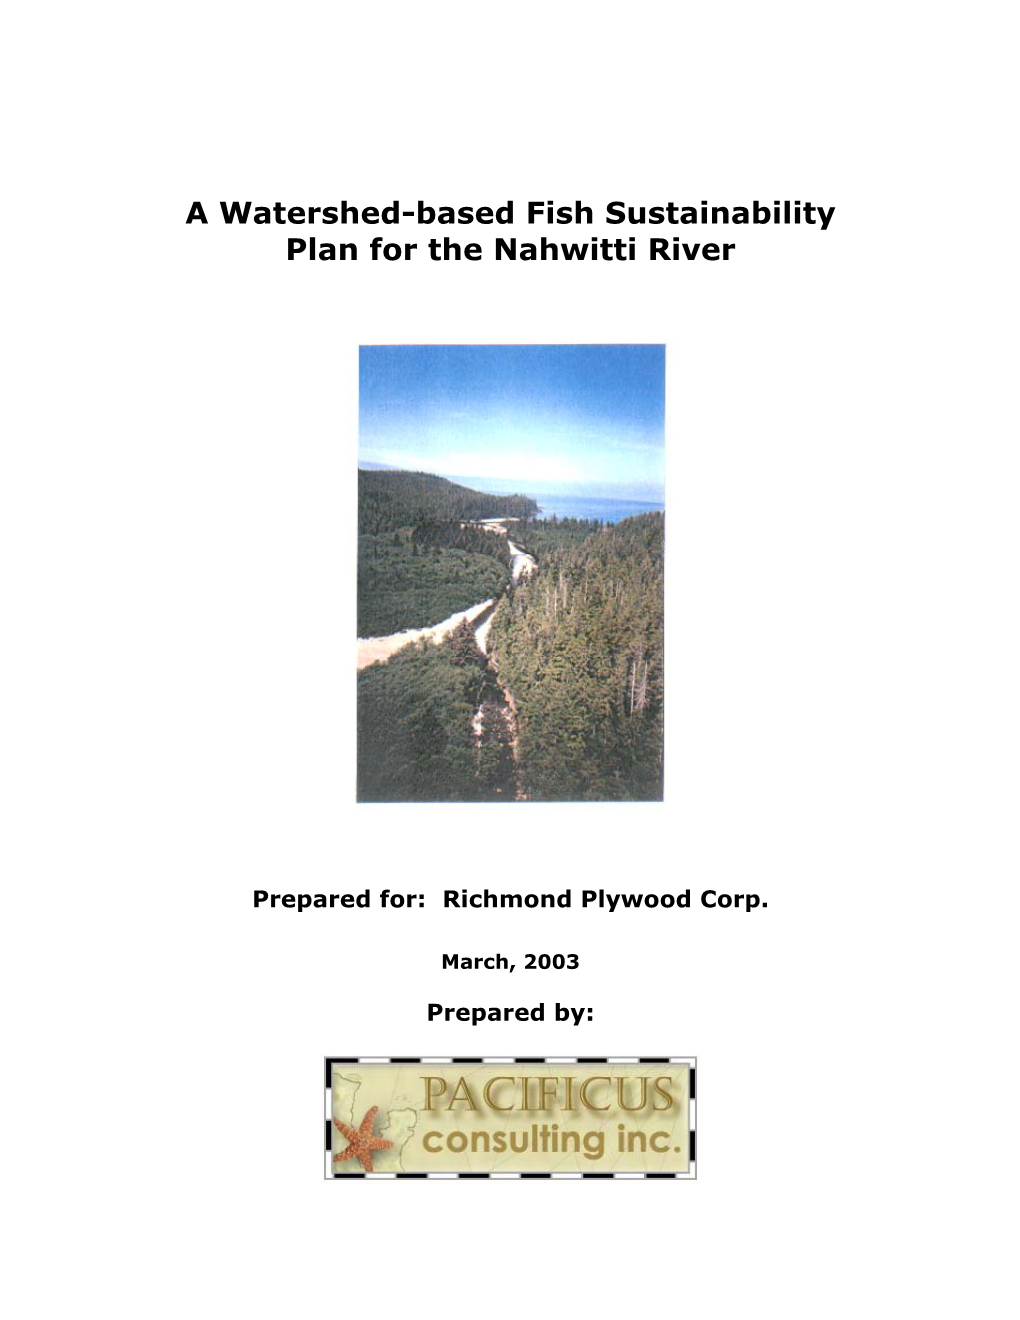 Watershed-Based Fish Sustainability Plan for the Nahwitti River